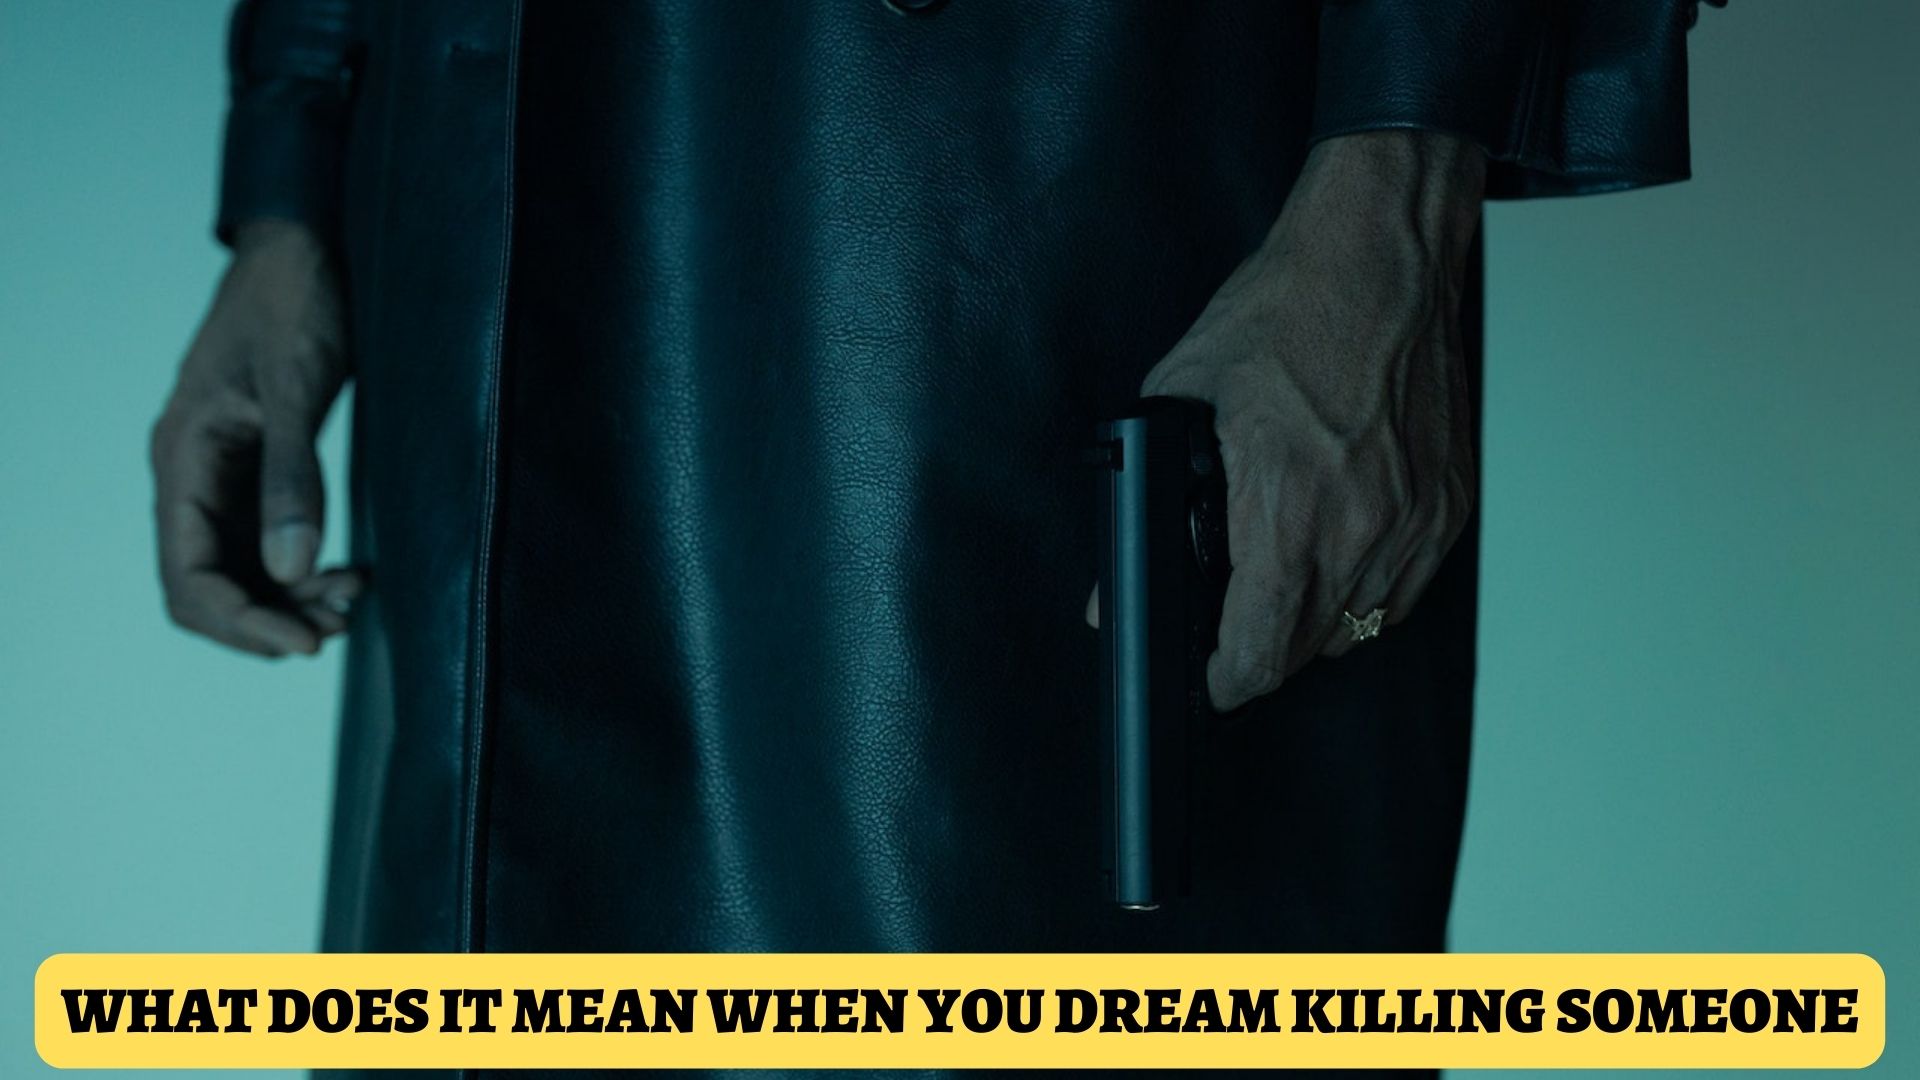 What Does It Mean When You Dream Killing Someone?